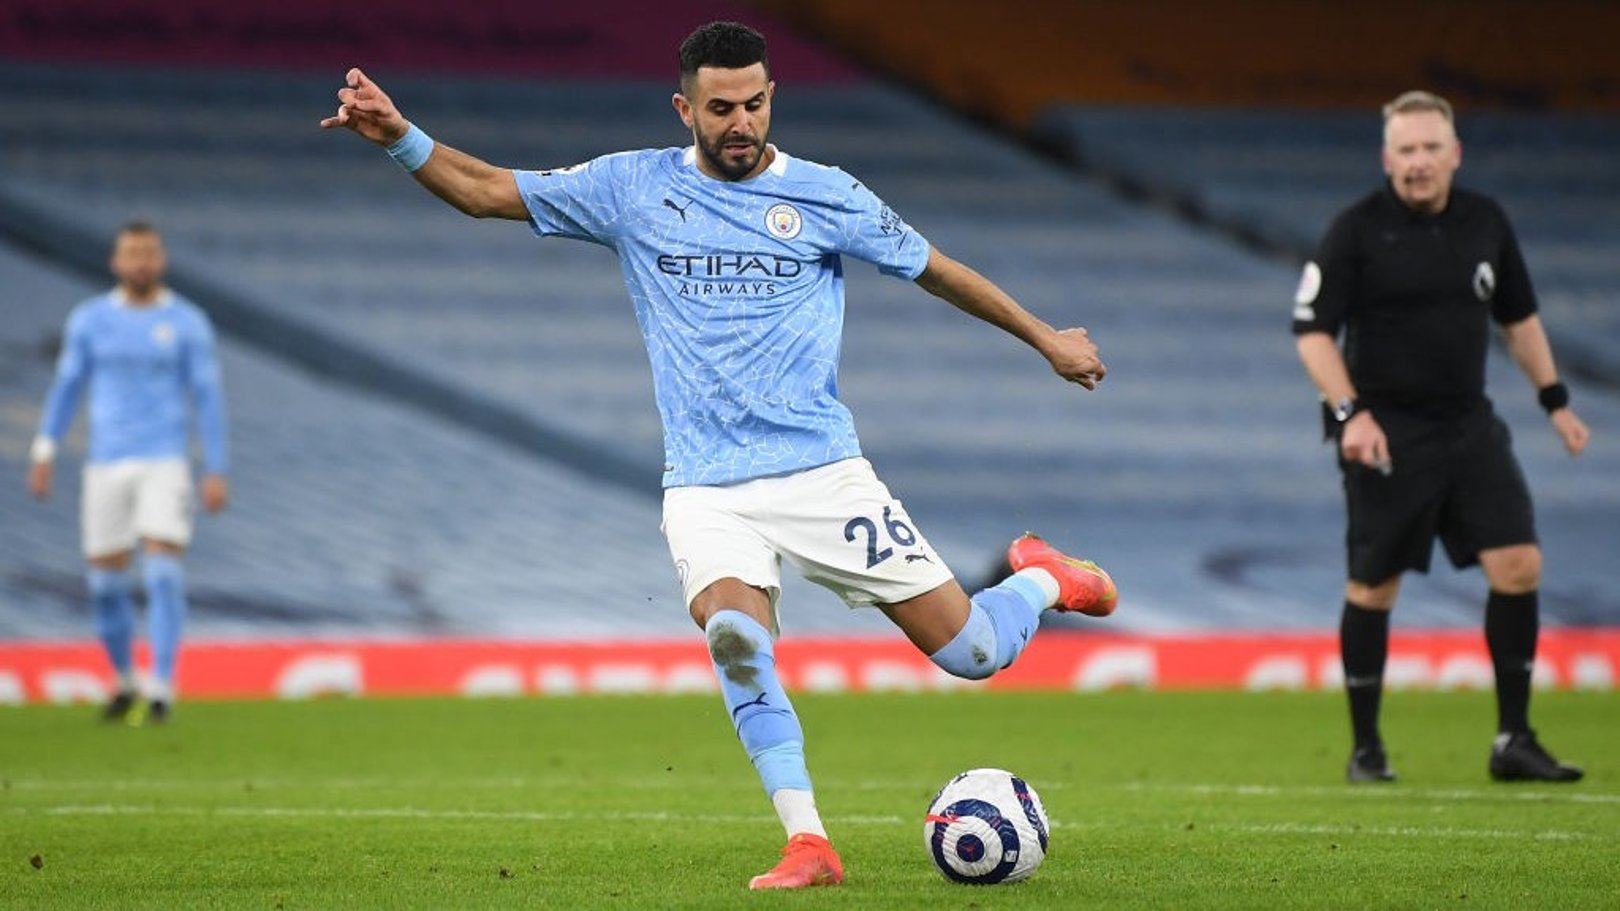 'Mahrez is best winger in Europe' says former City skipper